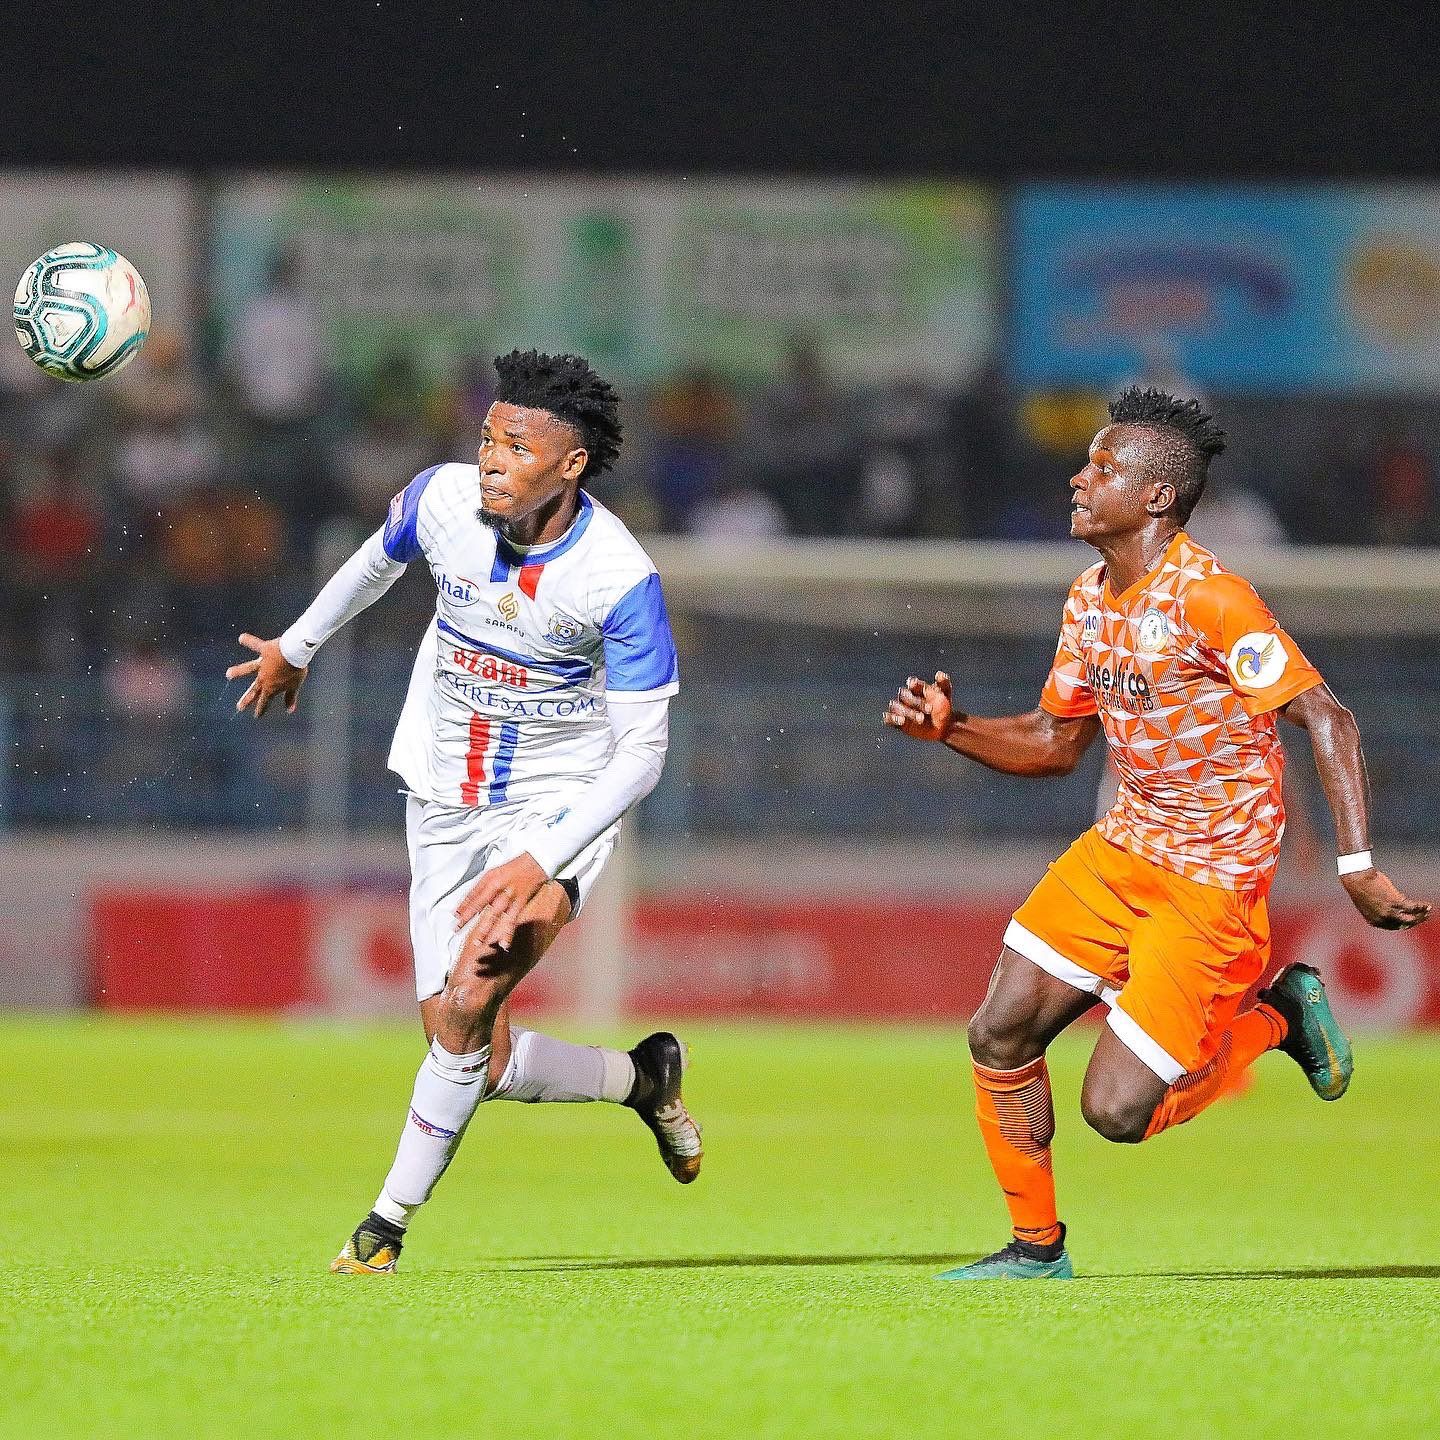 Azam FC vs Ruvu Shooting: Prediction, Odds, Betting Tips, and How to Watch | 15/11/2022